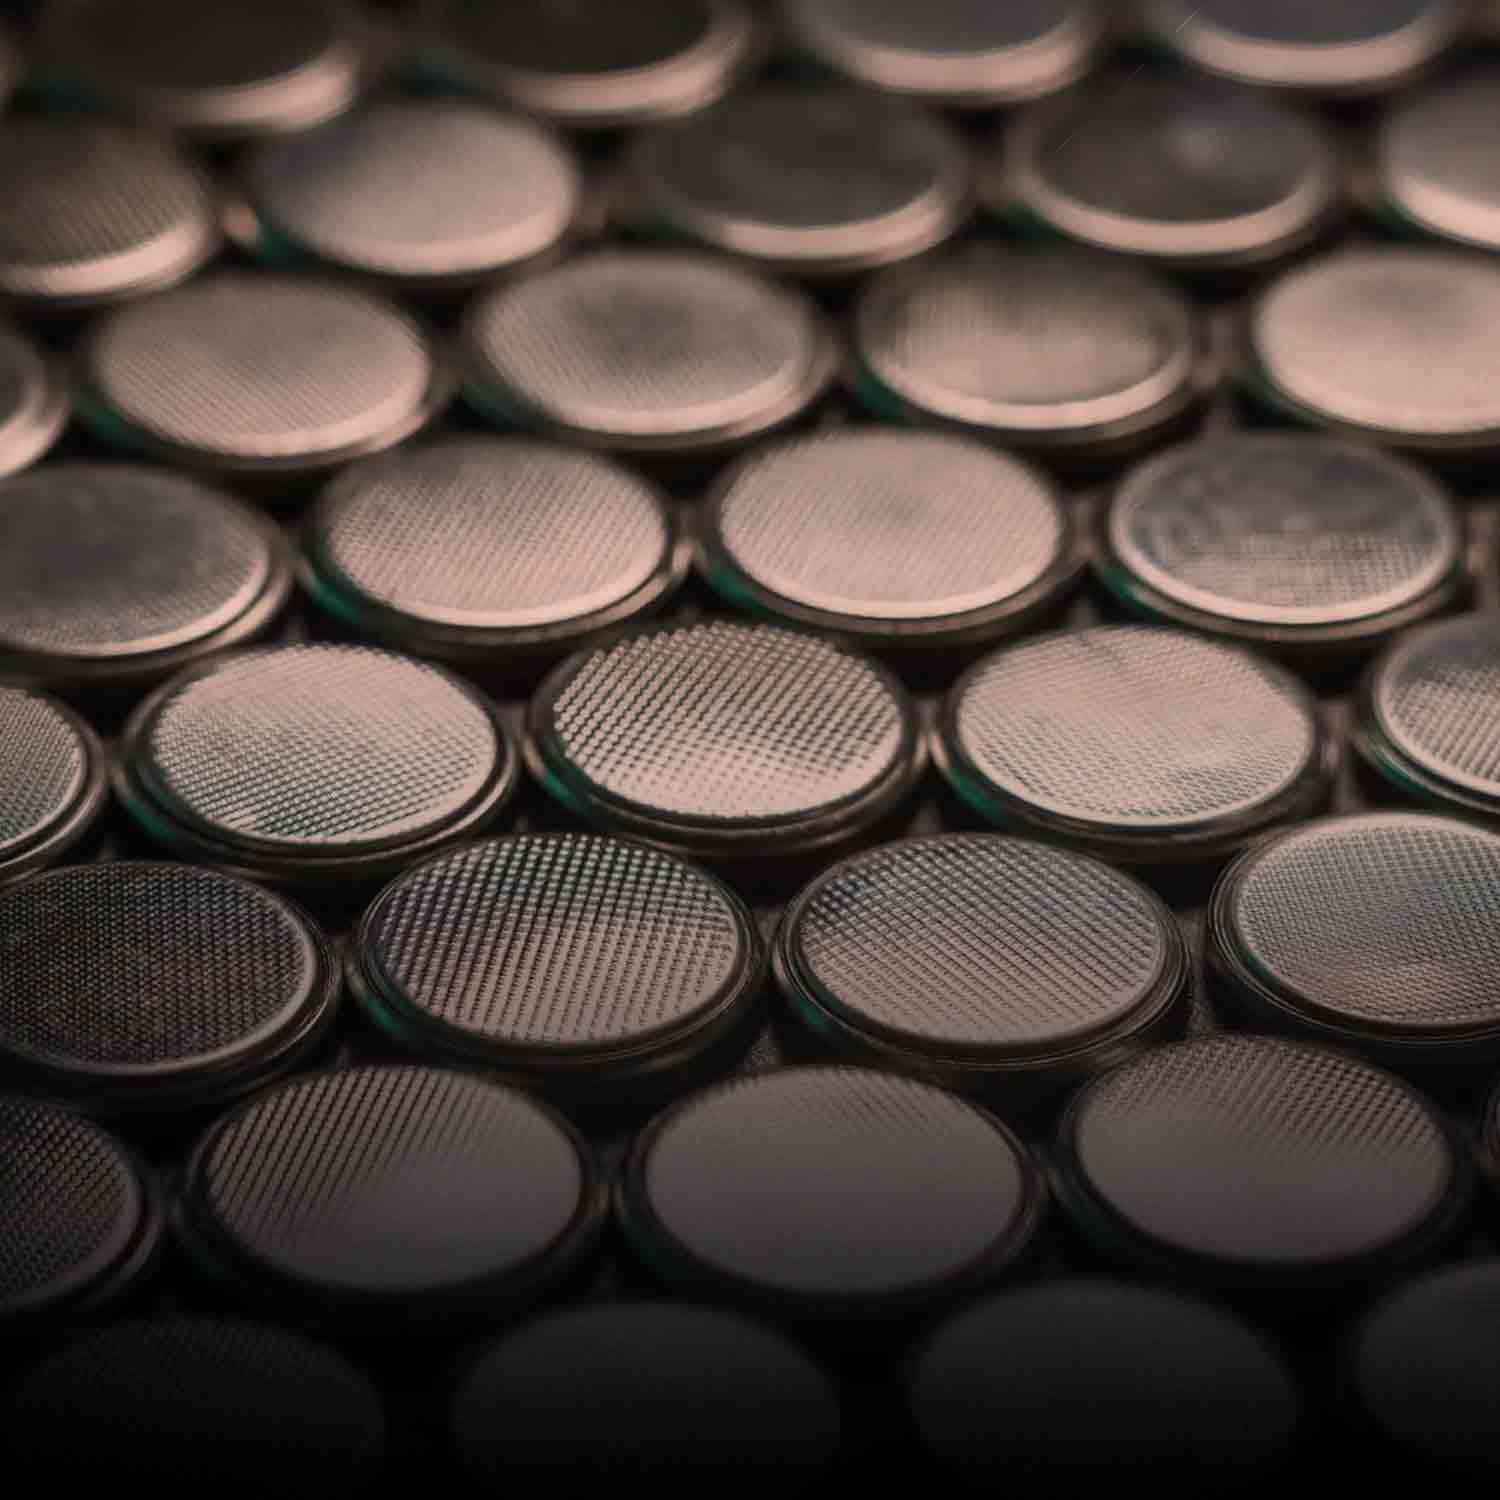 Many coin cell batteries arranged in a grid.